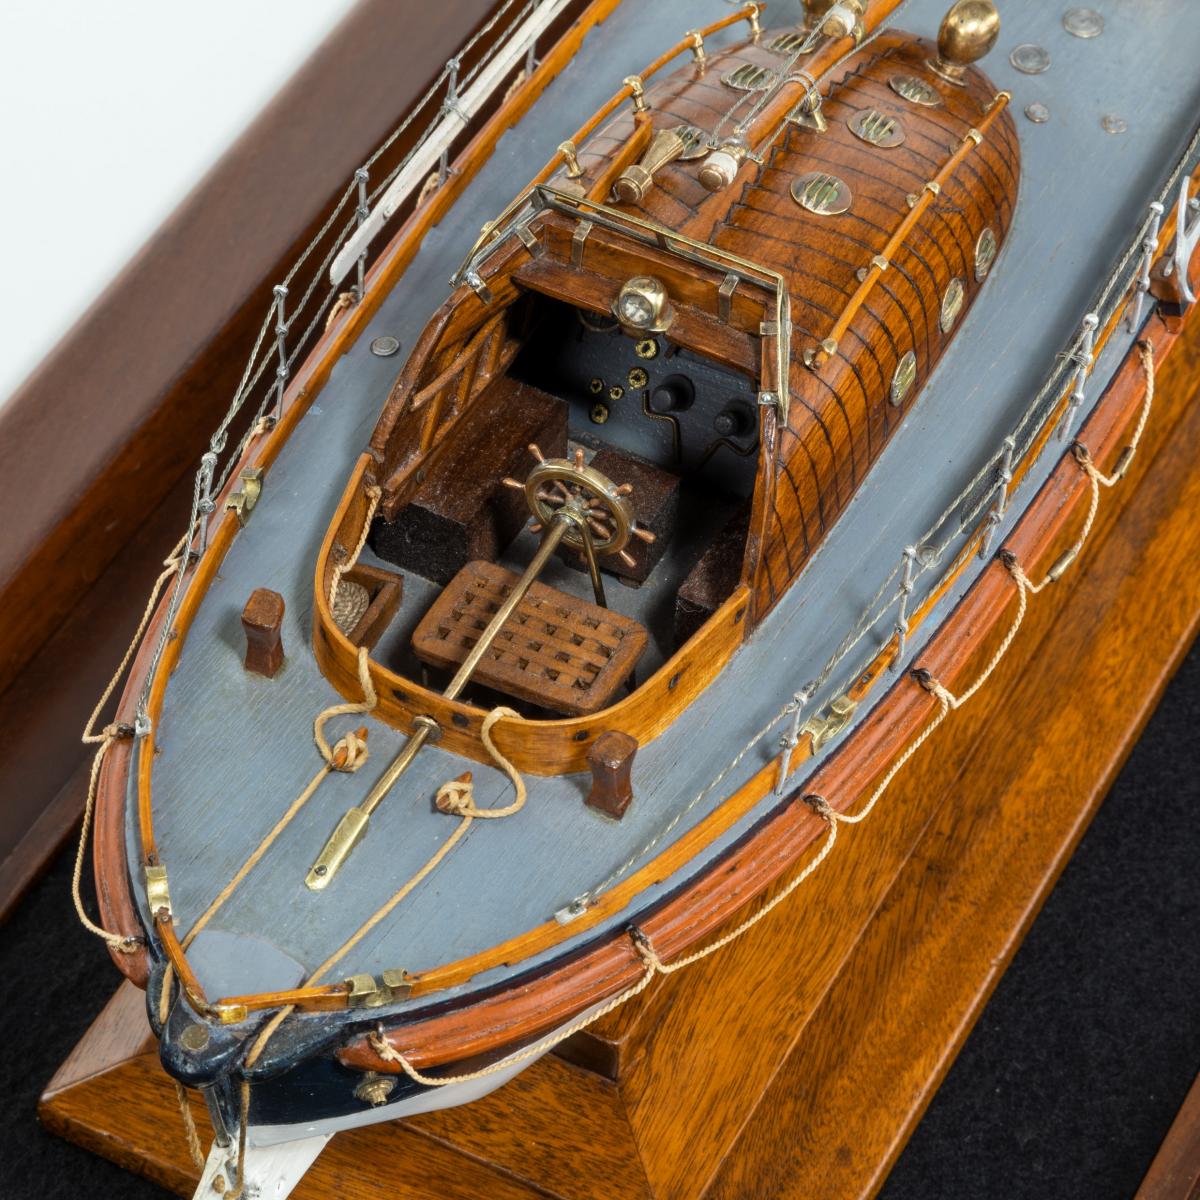 A scale model of a ‘Watson’ class lifeboat, circa 1931